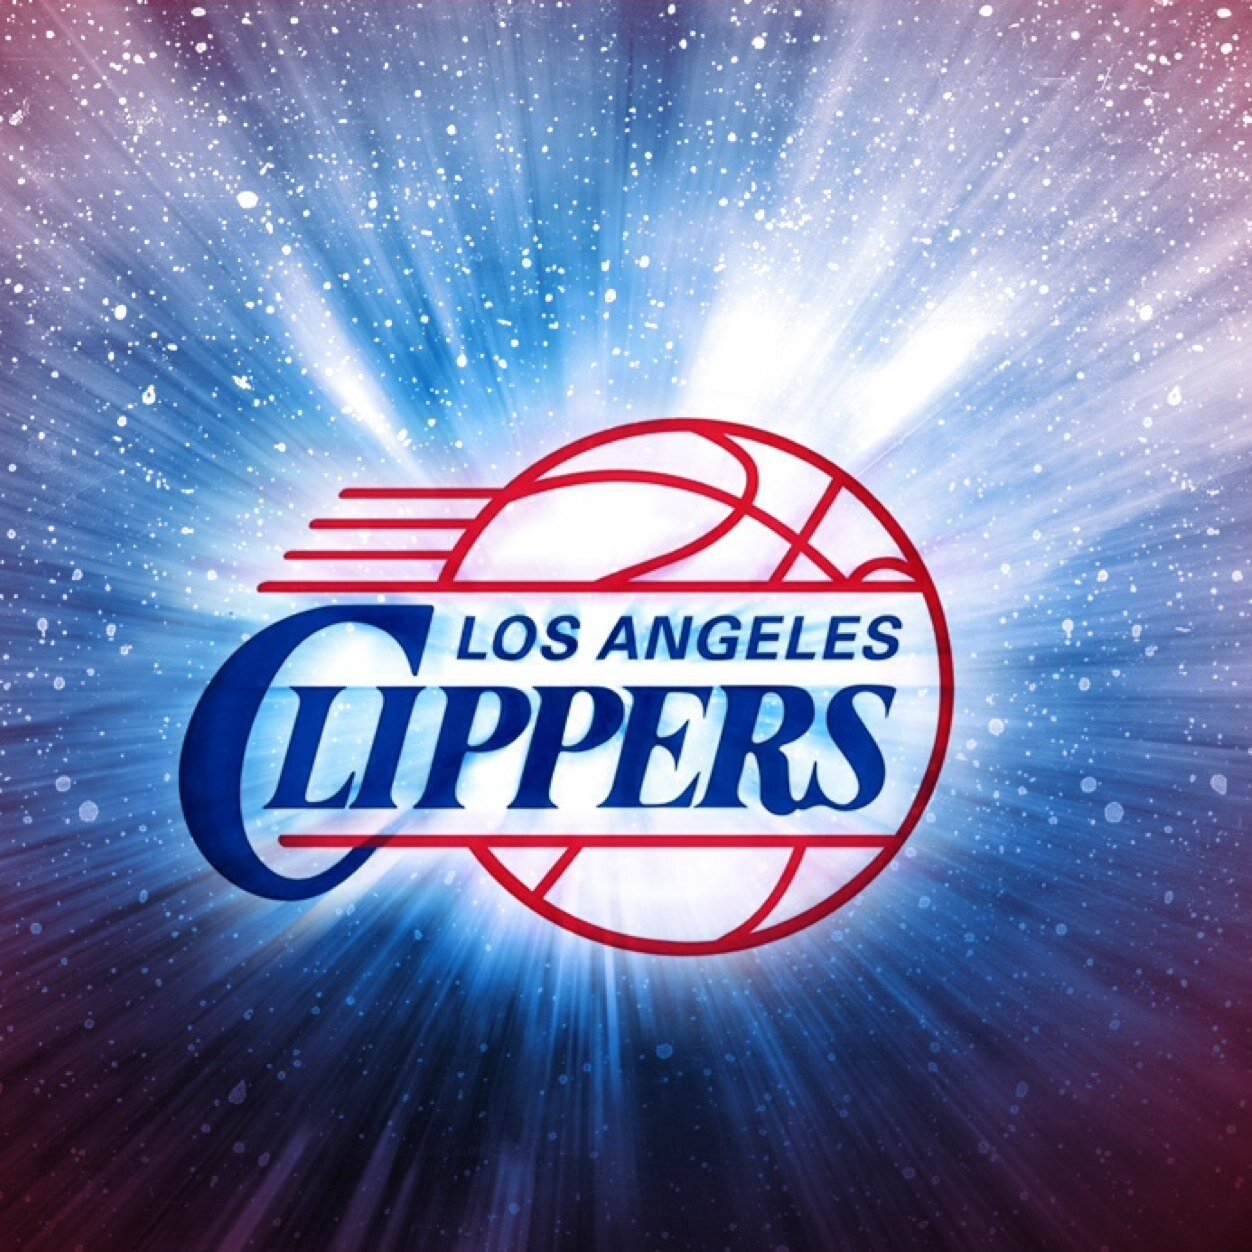 Unofficial fan account if the LA Clippers!